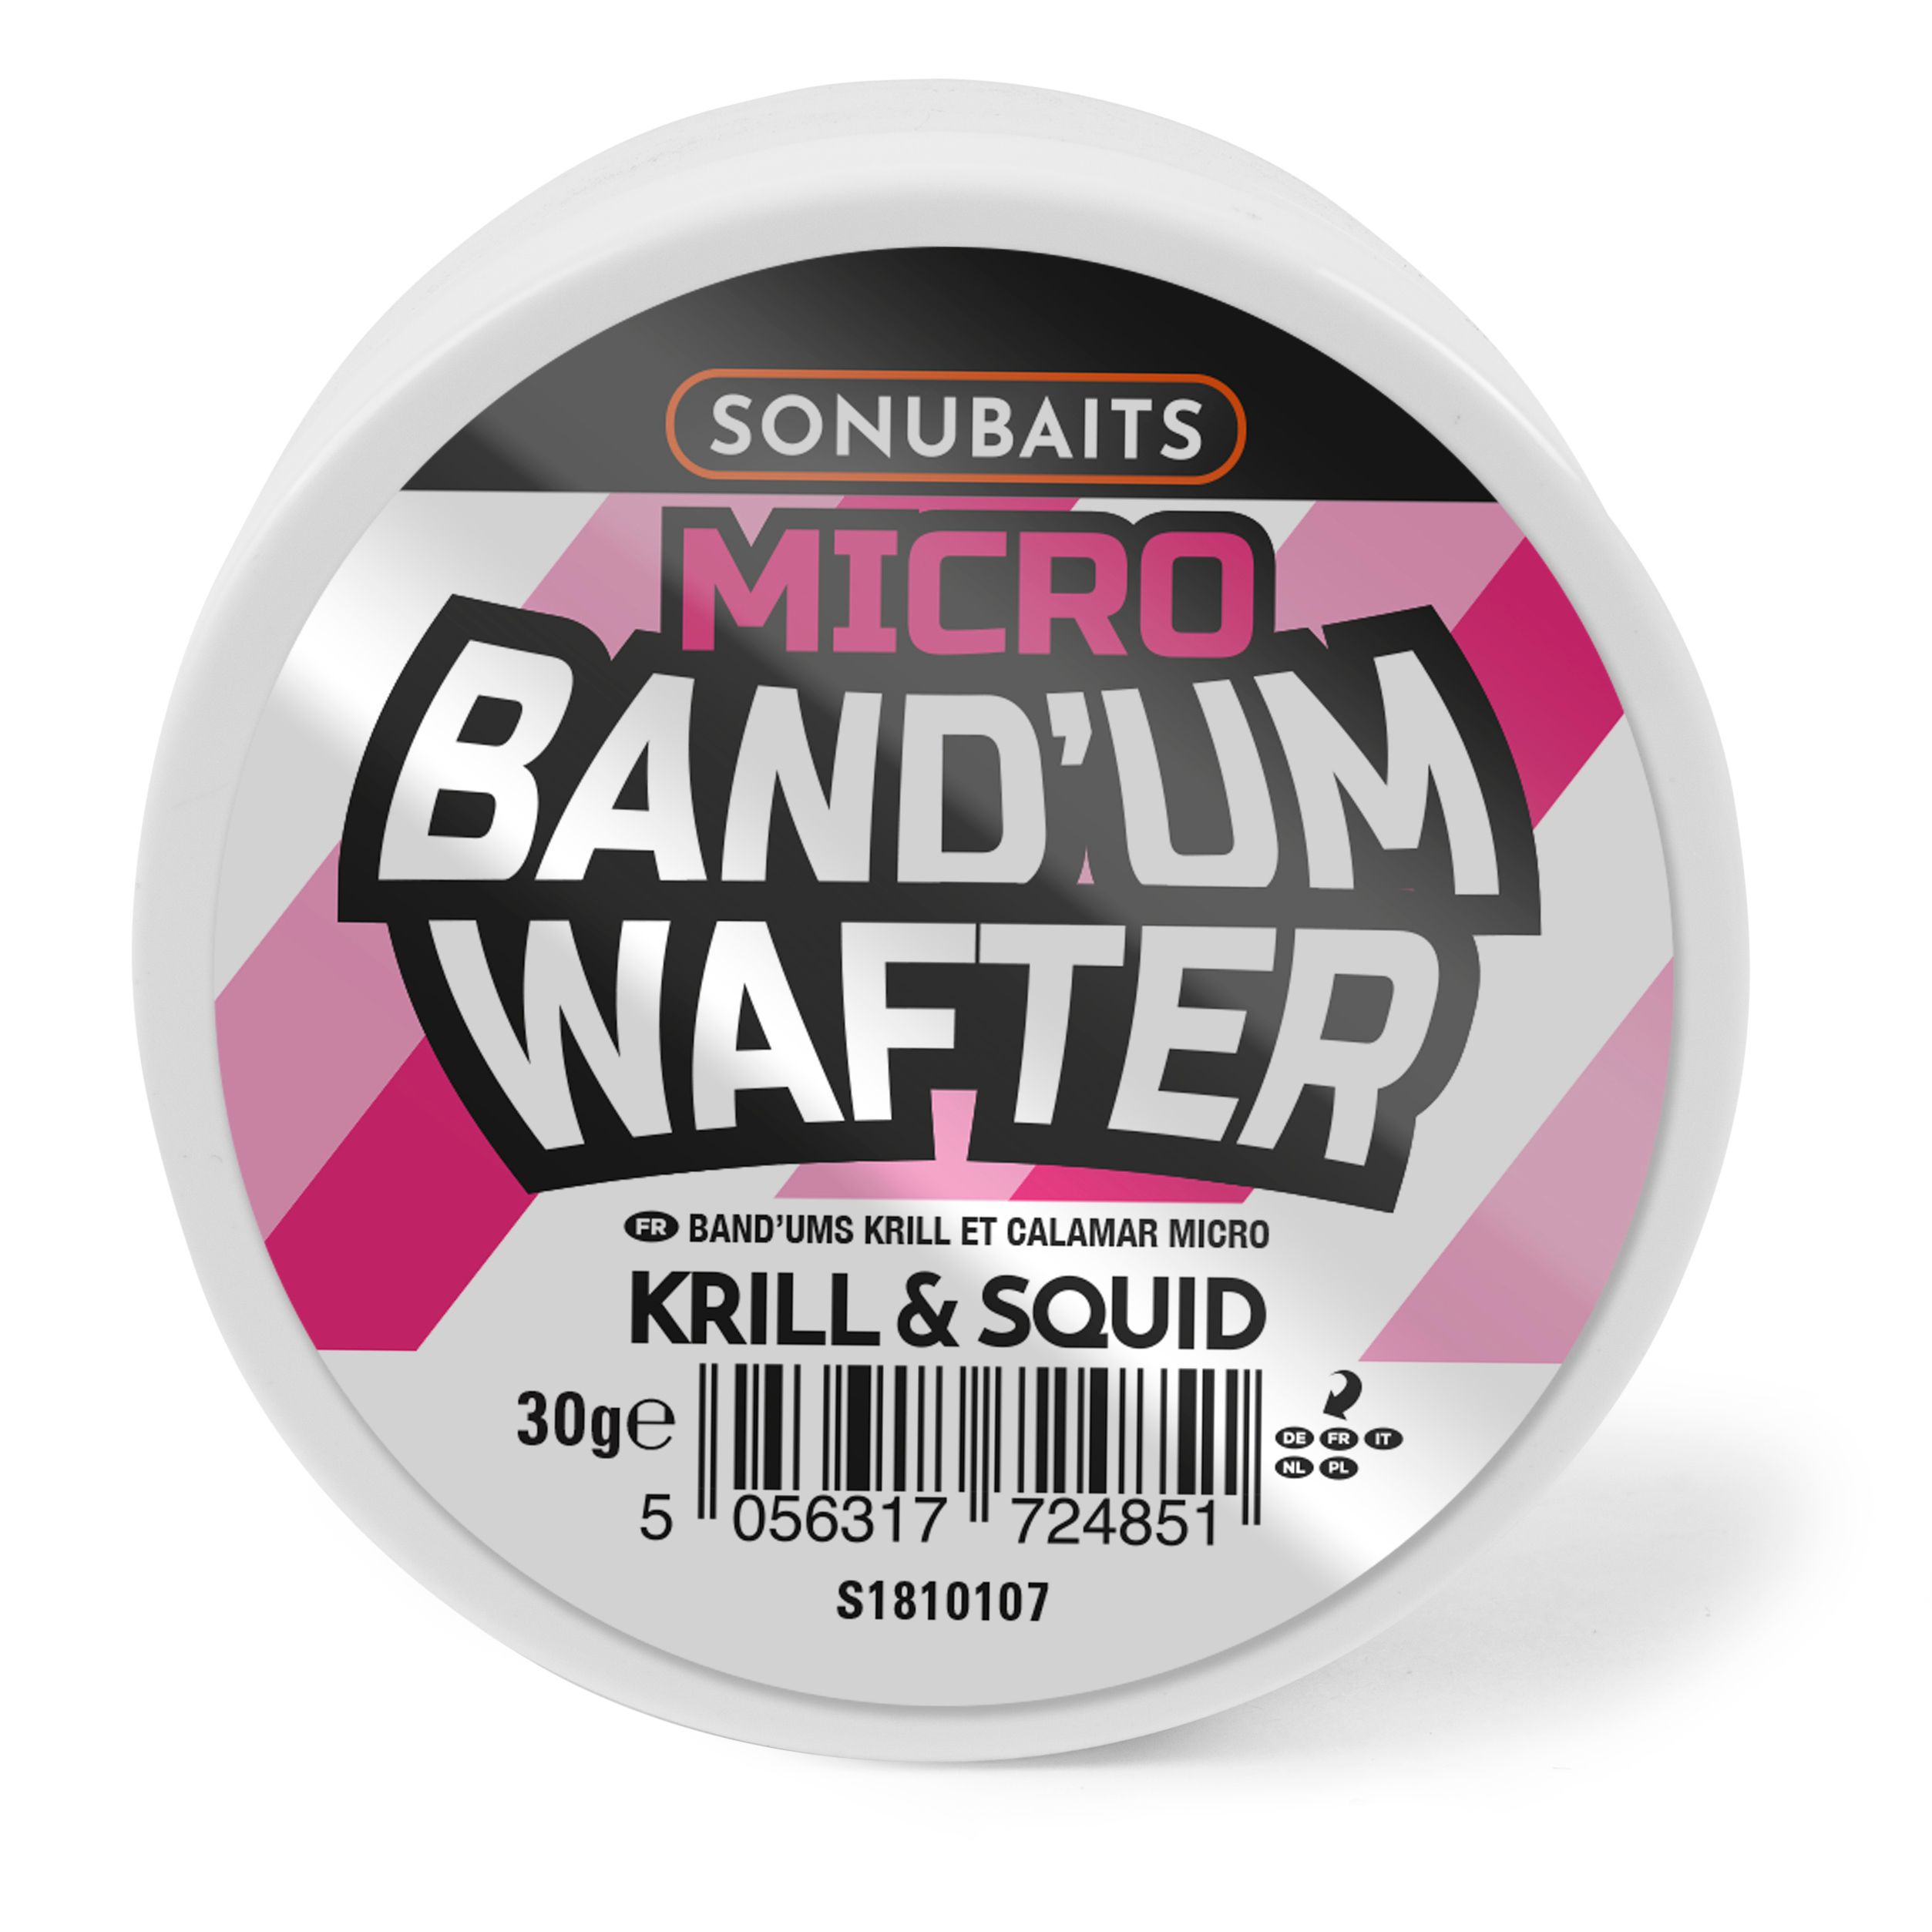 Sonubaits Micro Band'Um Wafter - Krill & Squid